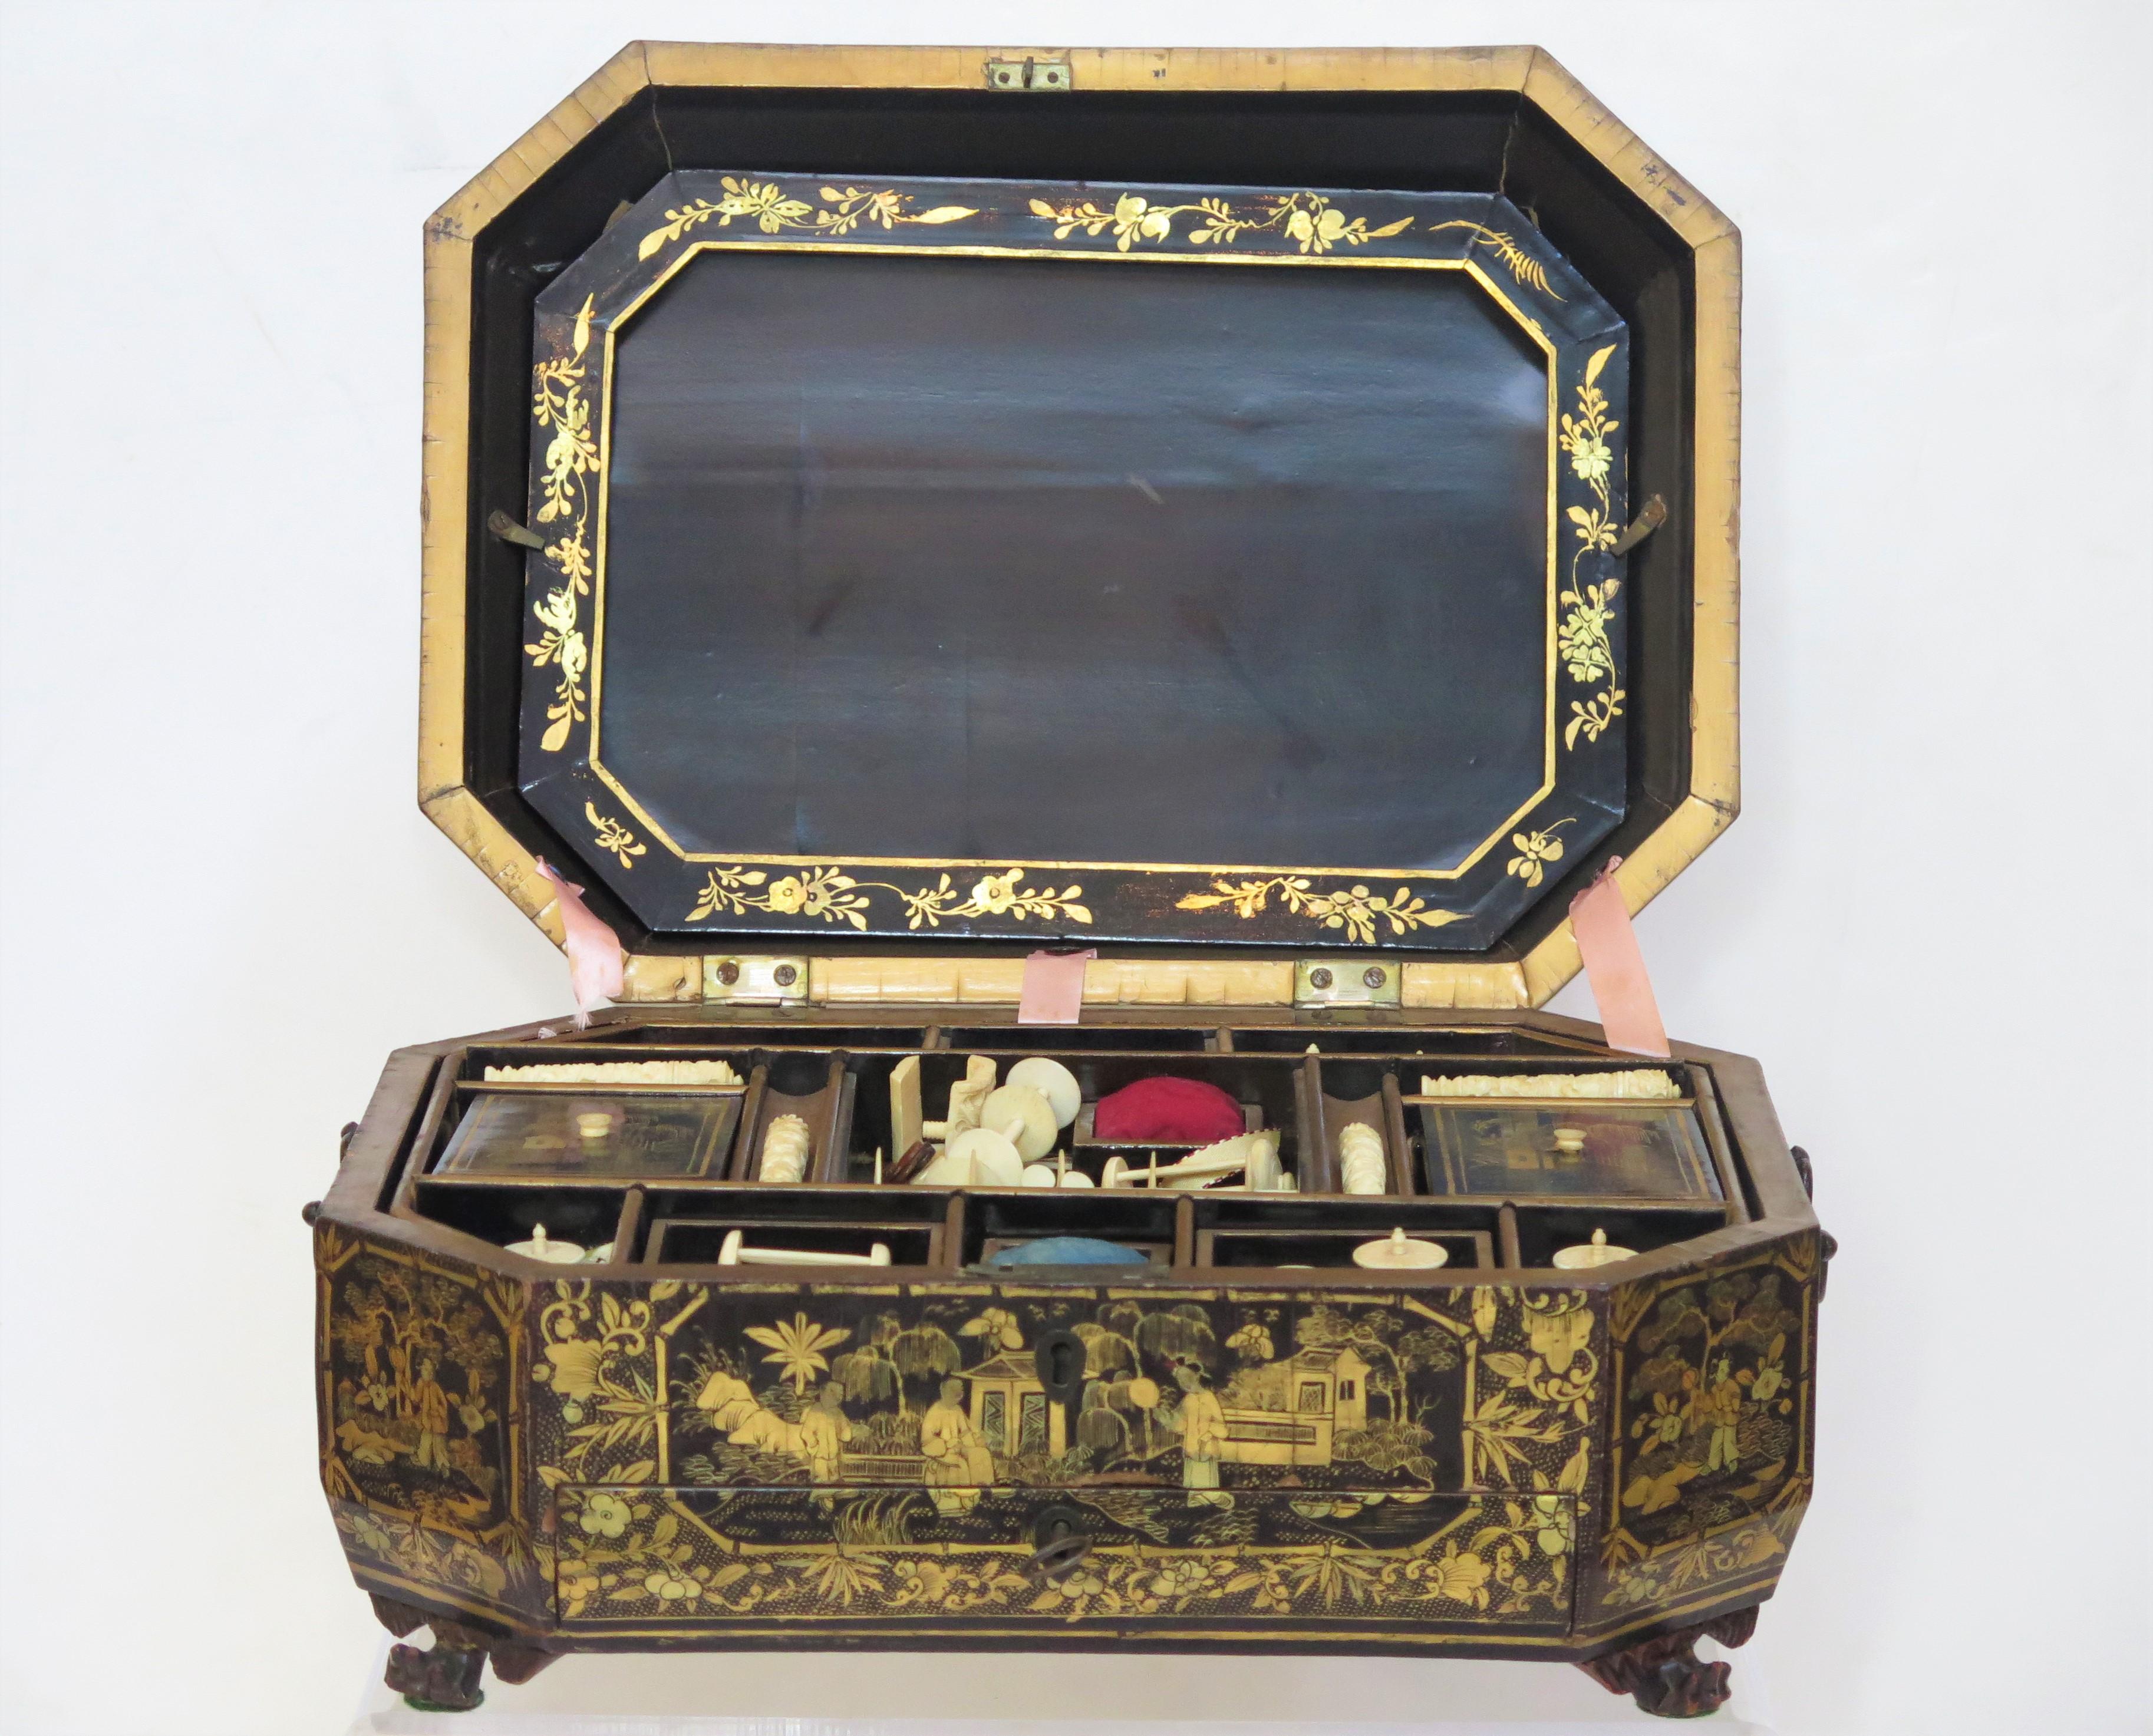 Ealy 19th Century Chinese Export Lacquer Sewing Box For Sale 1